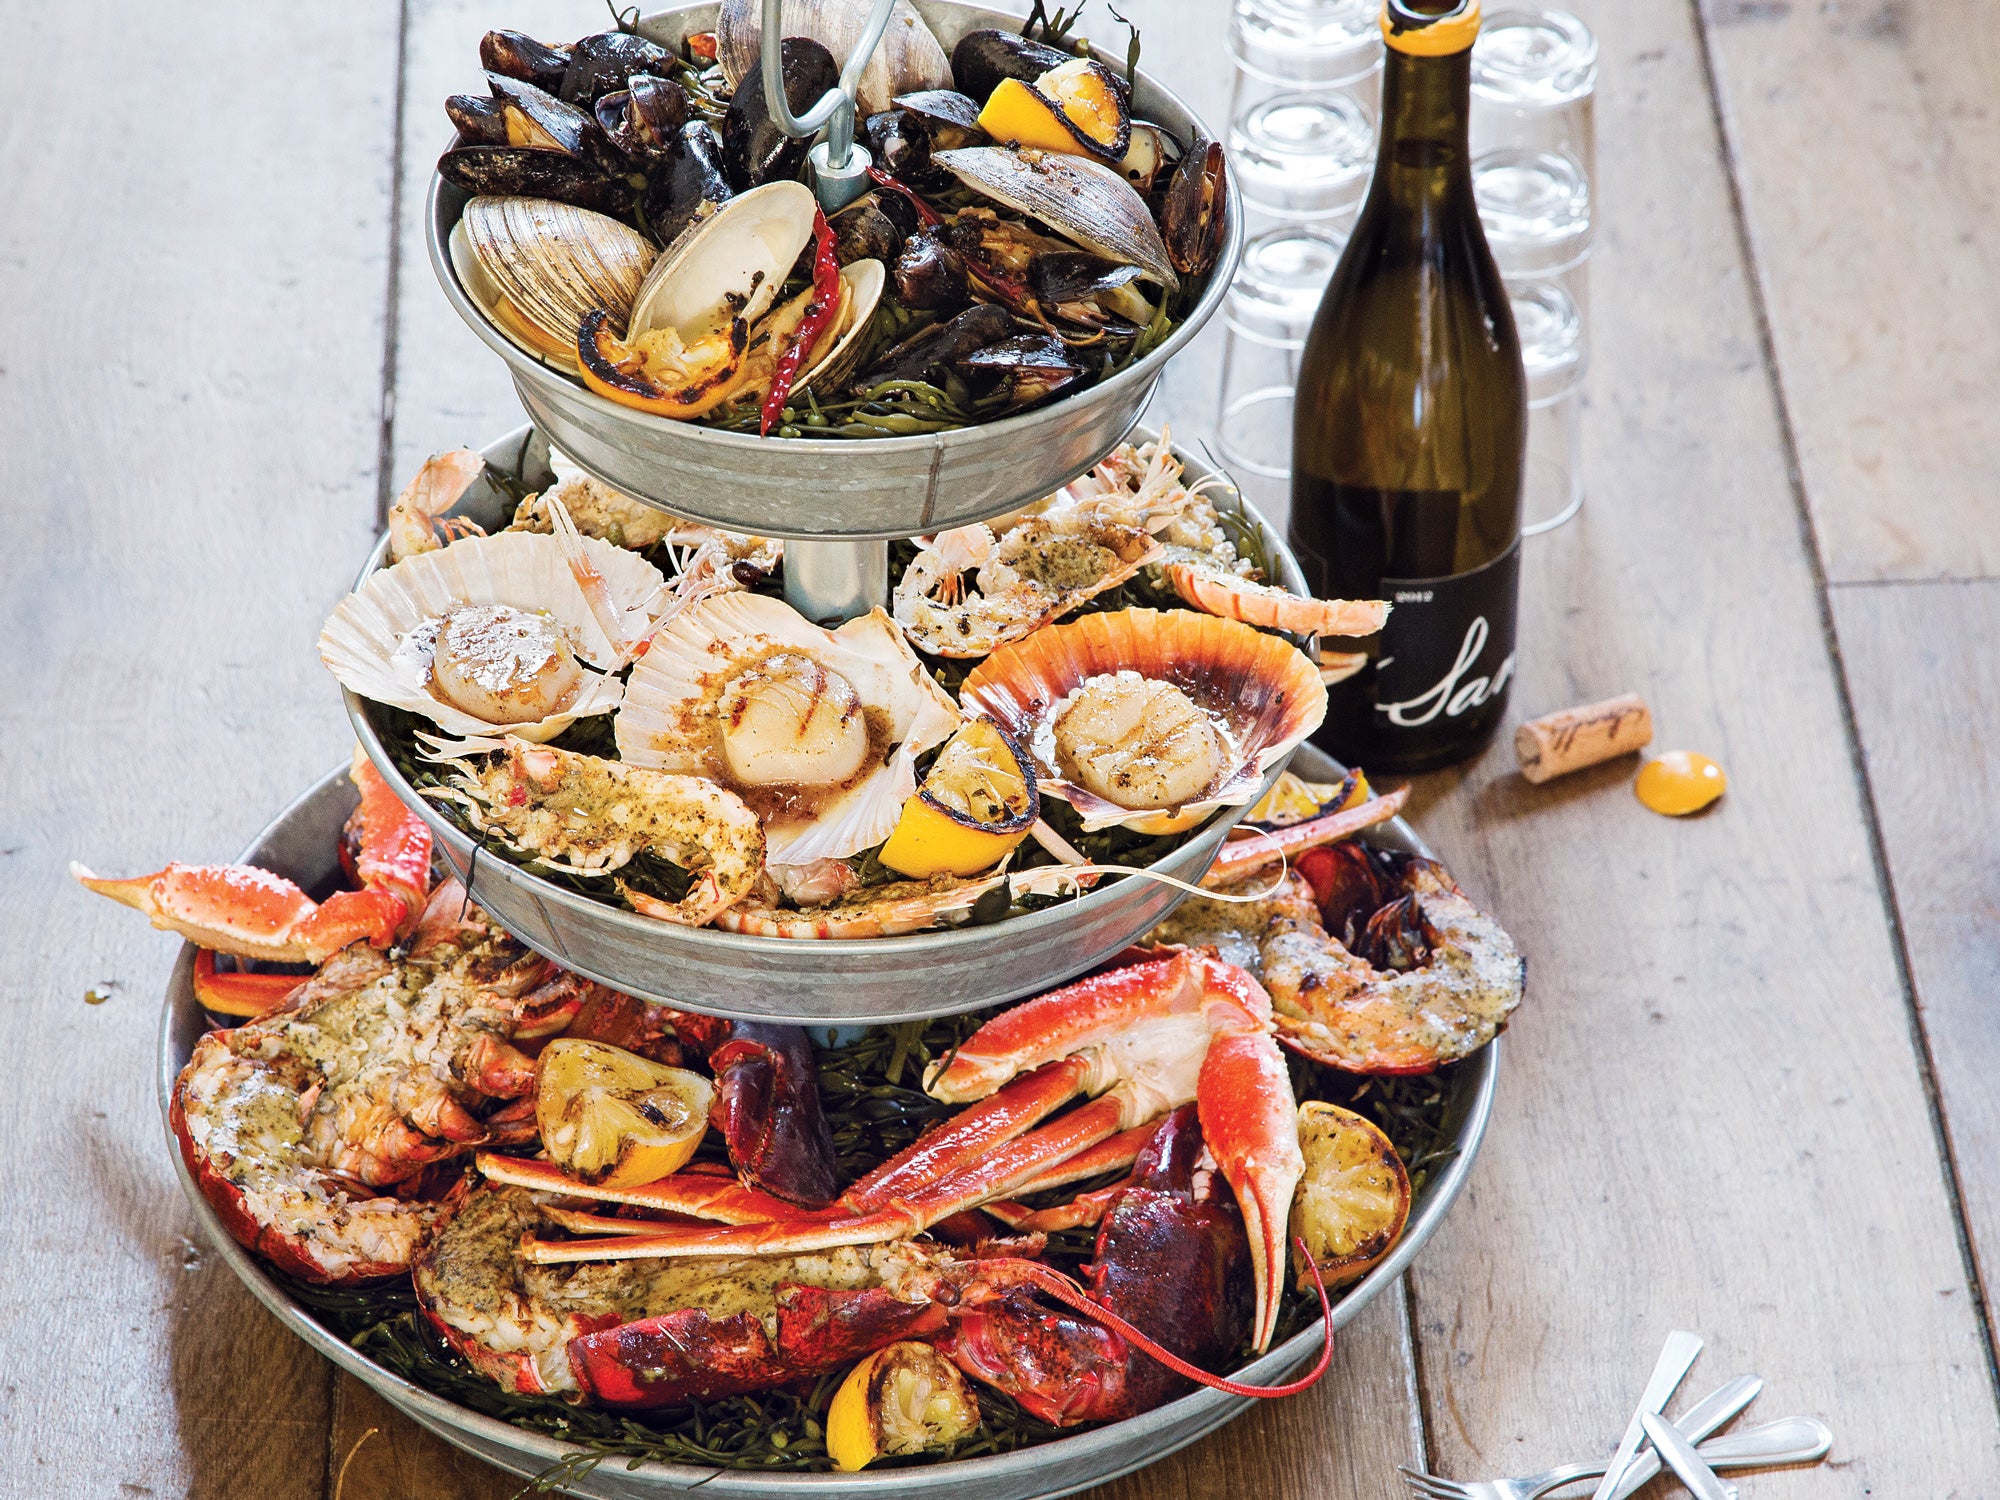 How to Make a Seafood Tower? 